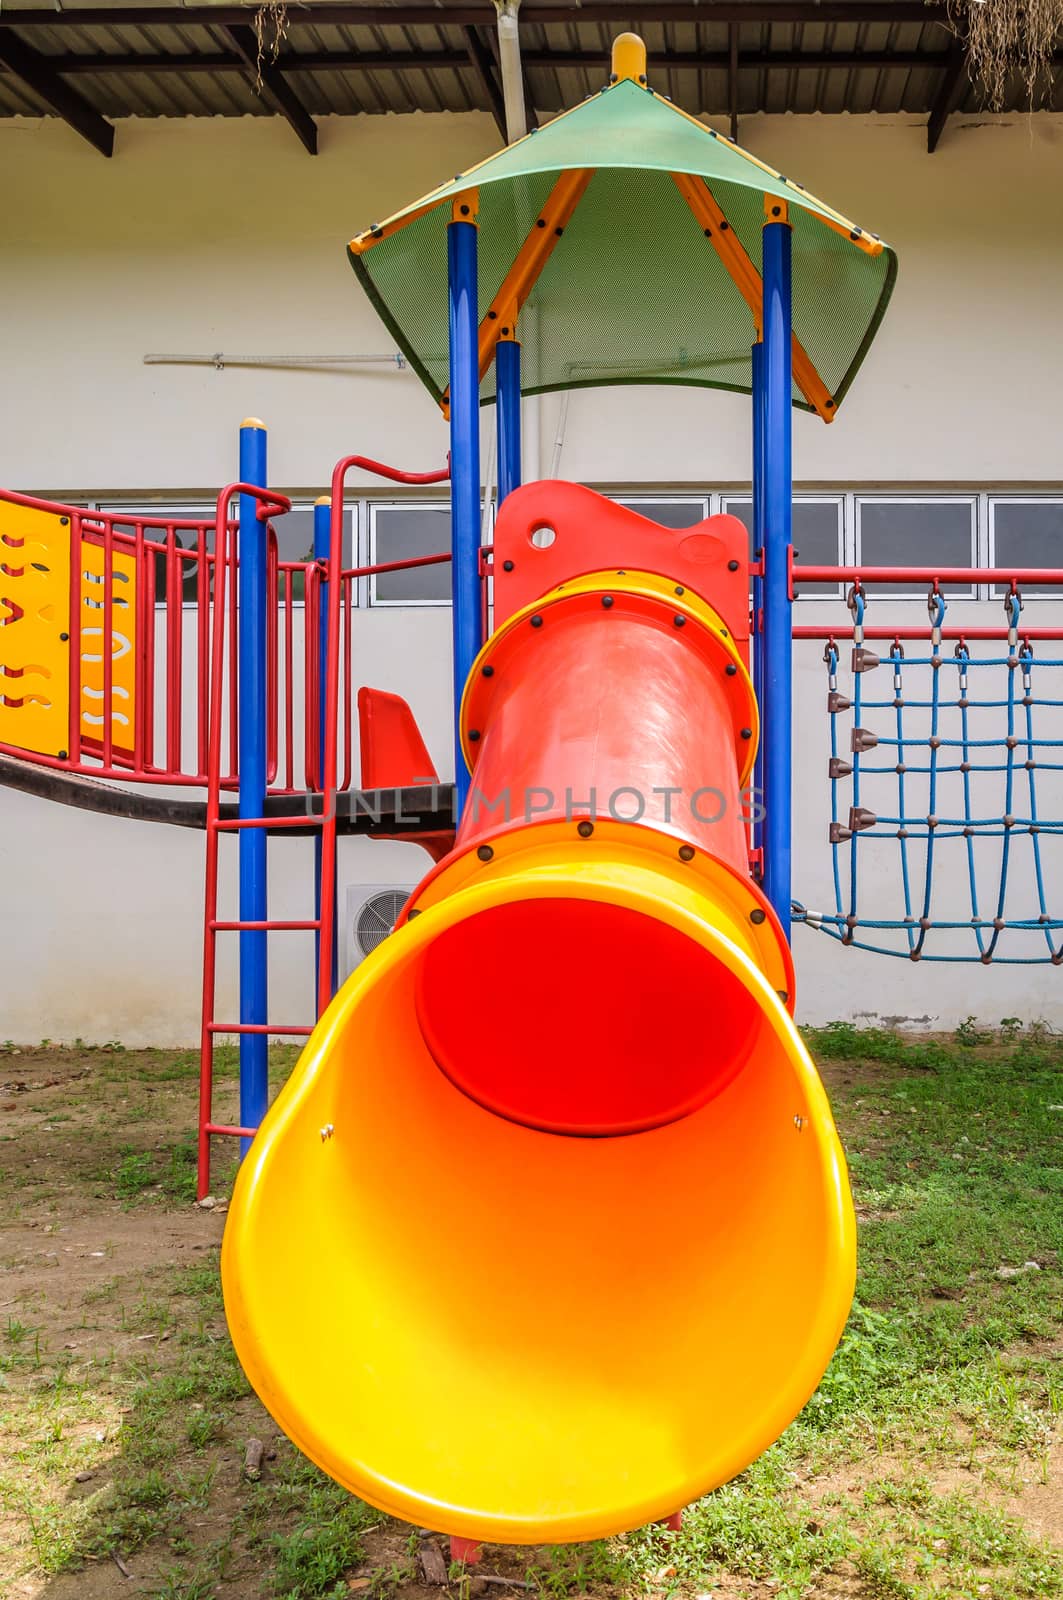 Colorful playground equipment by NuwatPhoto